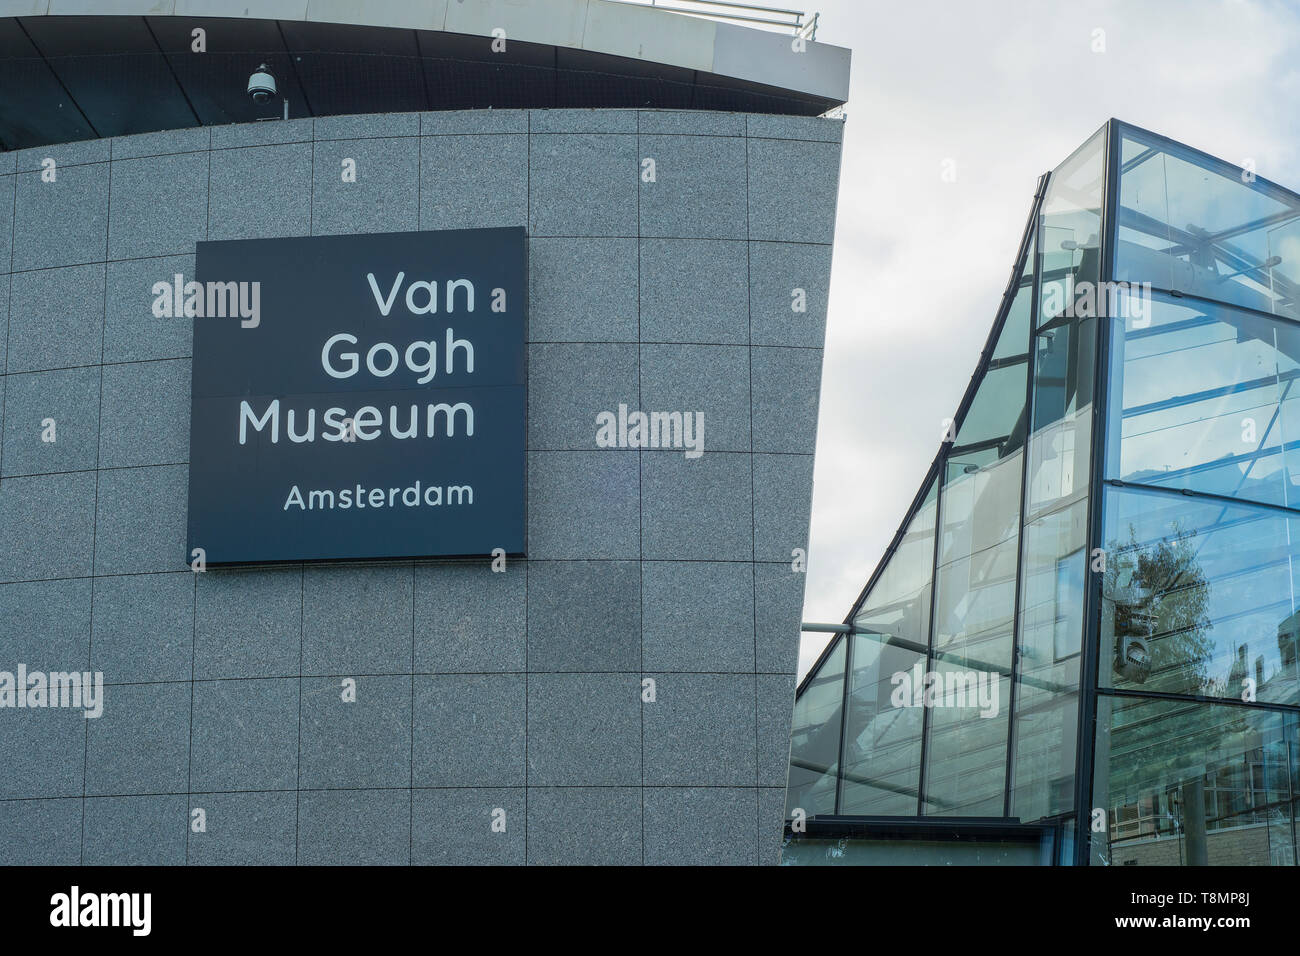 Amsterdam, the Netherlands - October 18, 2018: Close up of the Van Gogh Museum in Amsterdam, displaying Van Gogh’s artwork a populair and famous dutch Stock Photo